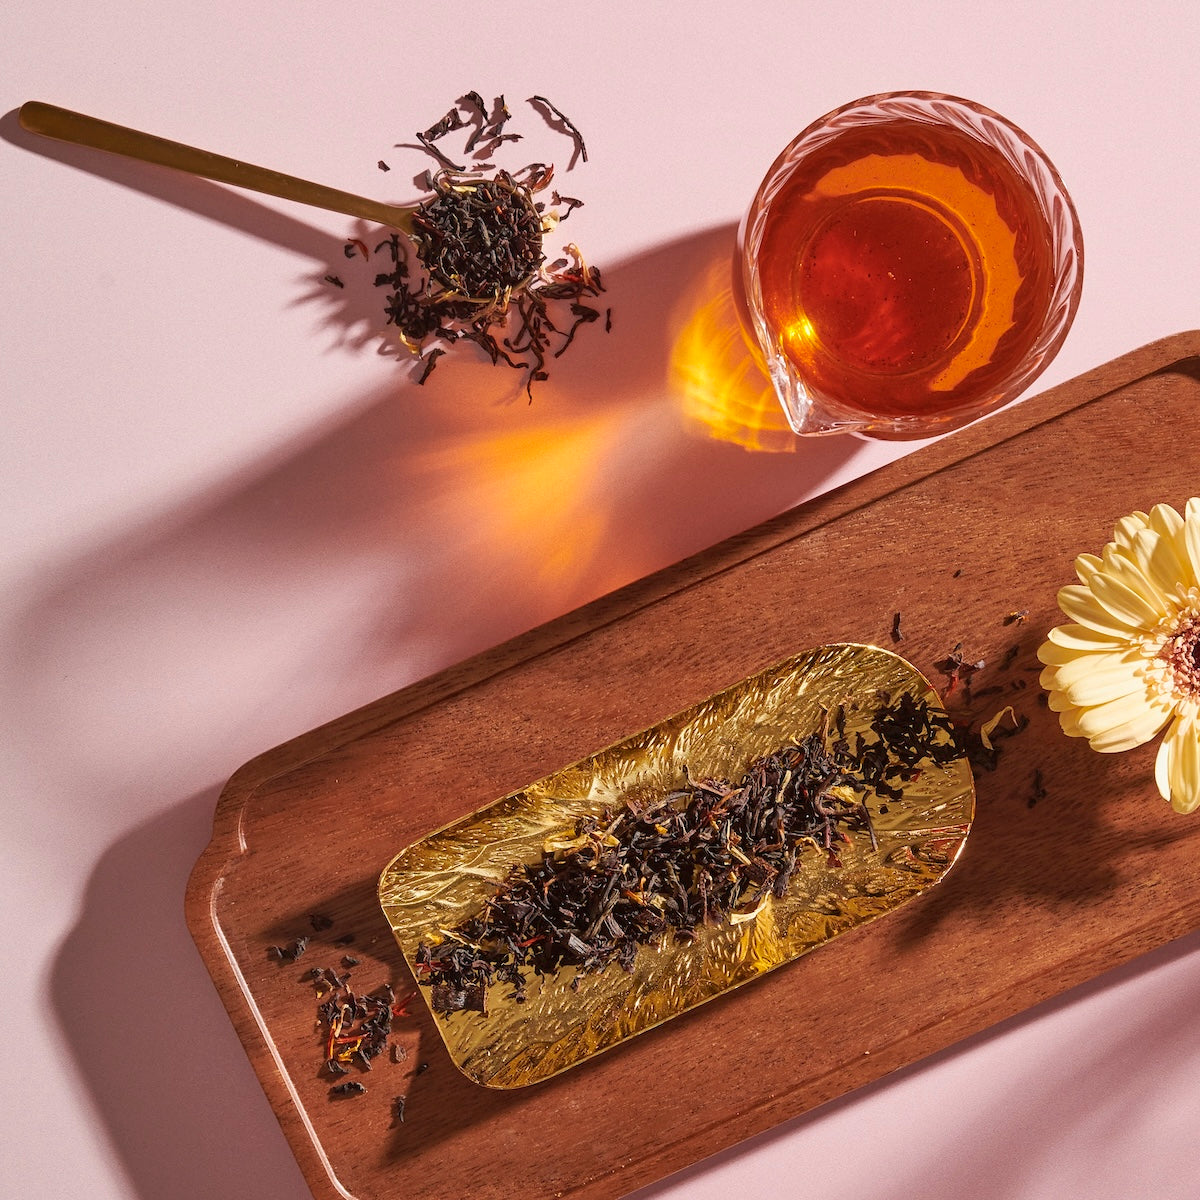 A flat lay image featuring a glass of Magic Hour&#39;s Goddess of Earl: Madagascar Vanilla Creme Tea for Soothing Delight &amp; Delicious Decadence, a spoon with loose tea leaves, and a golden tray with more tea leaves resting on a wooden tray. A single yellow flower decorates the corner of the wooden tray, all set against a light pink background.